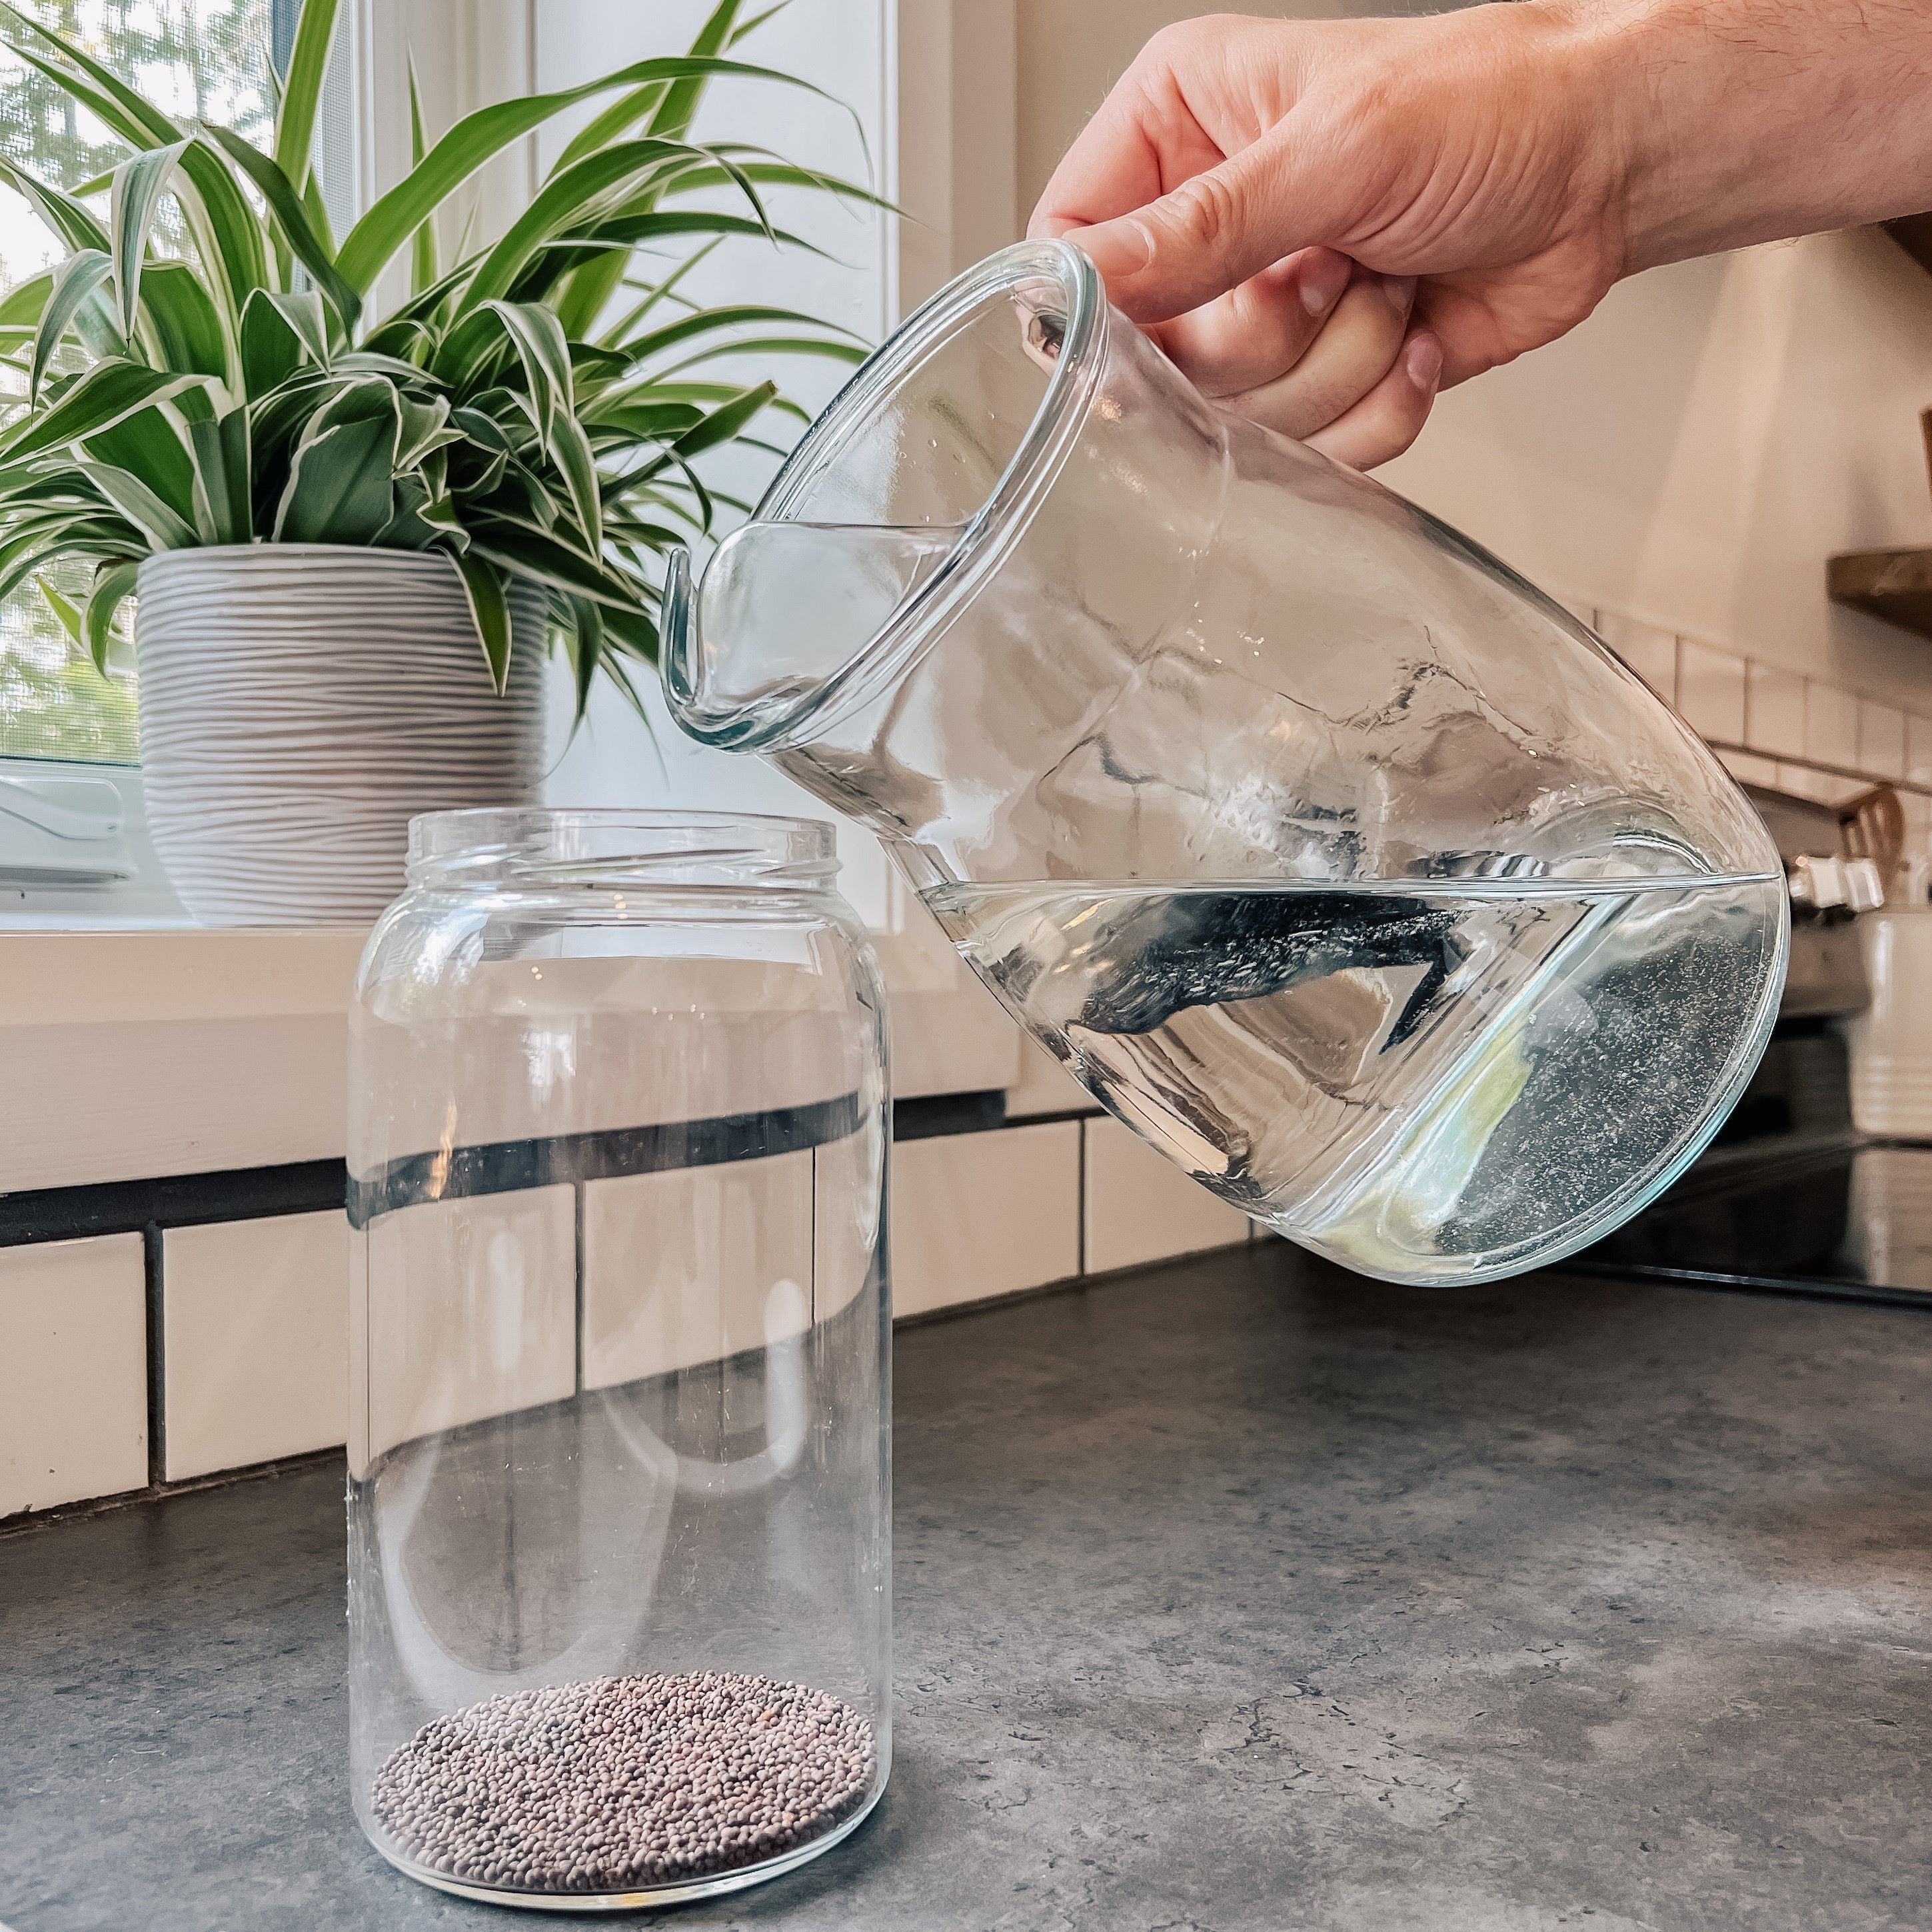 Pouring water from a pitcher into a jar with broccoli sprout seeds